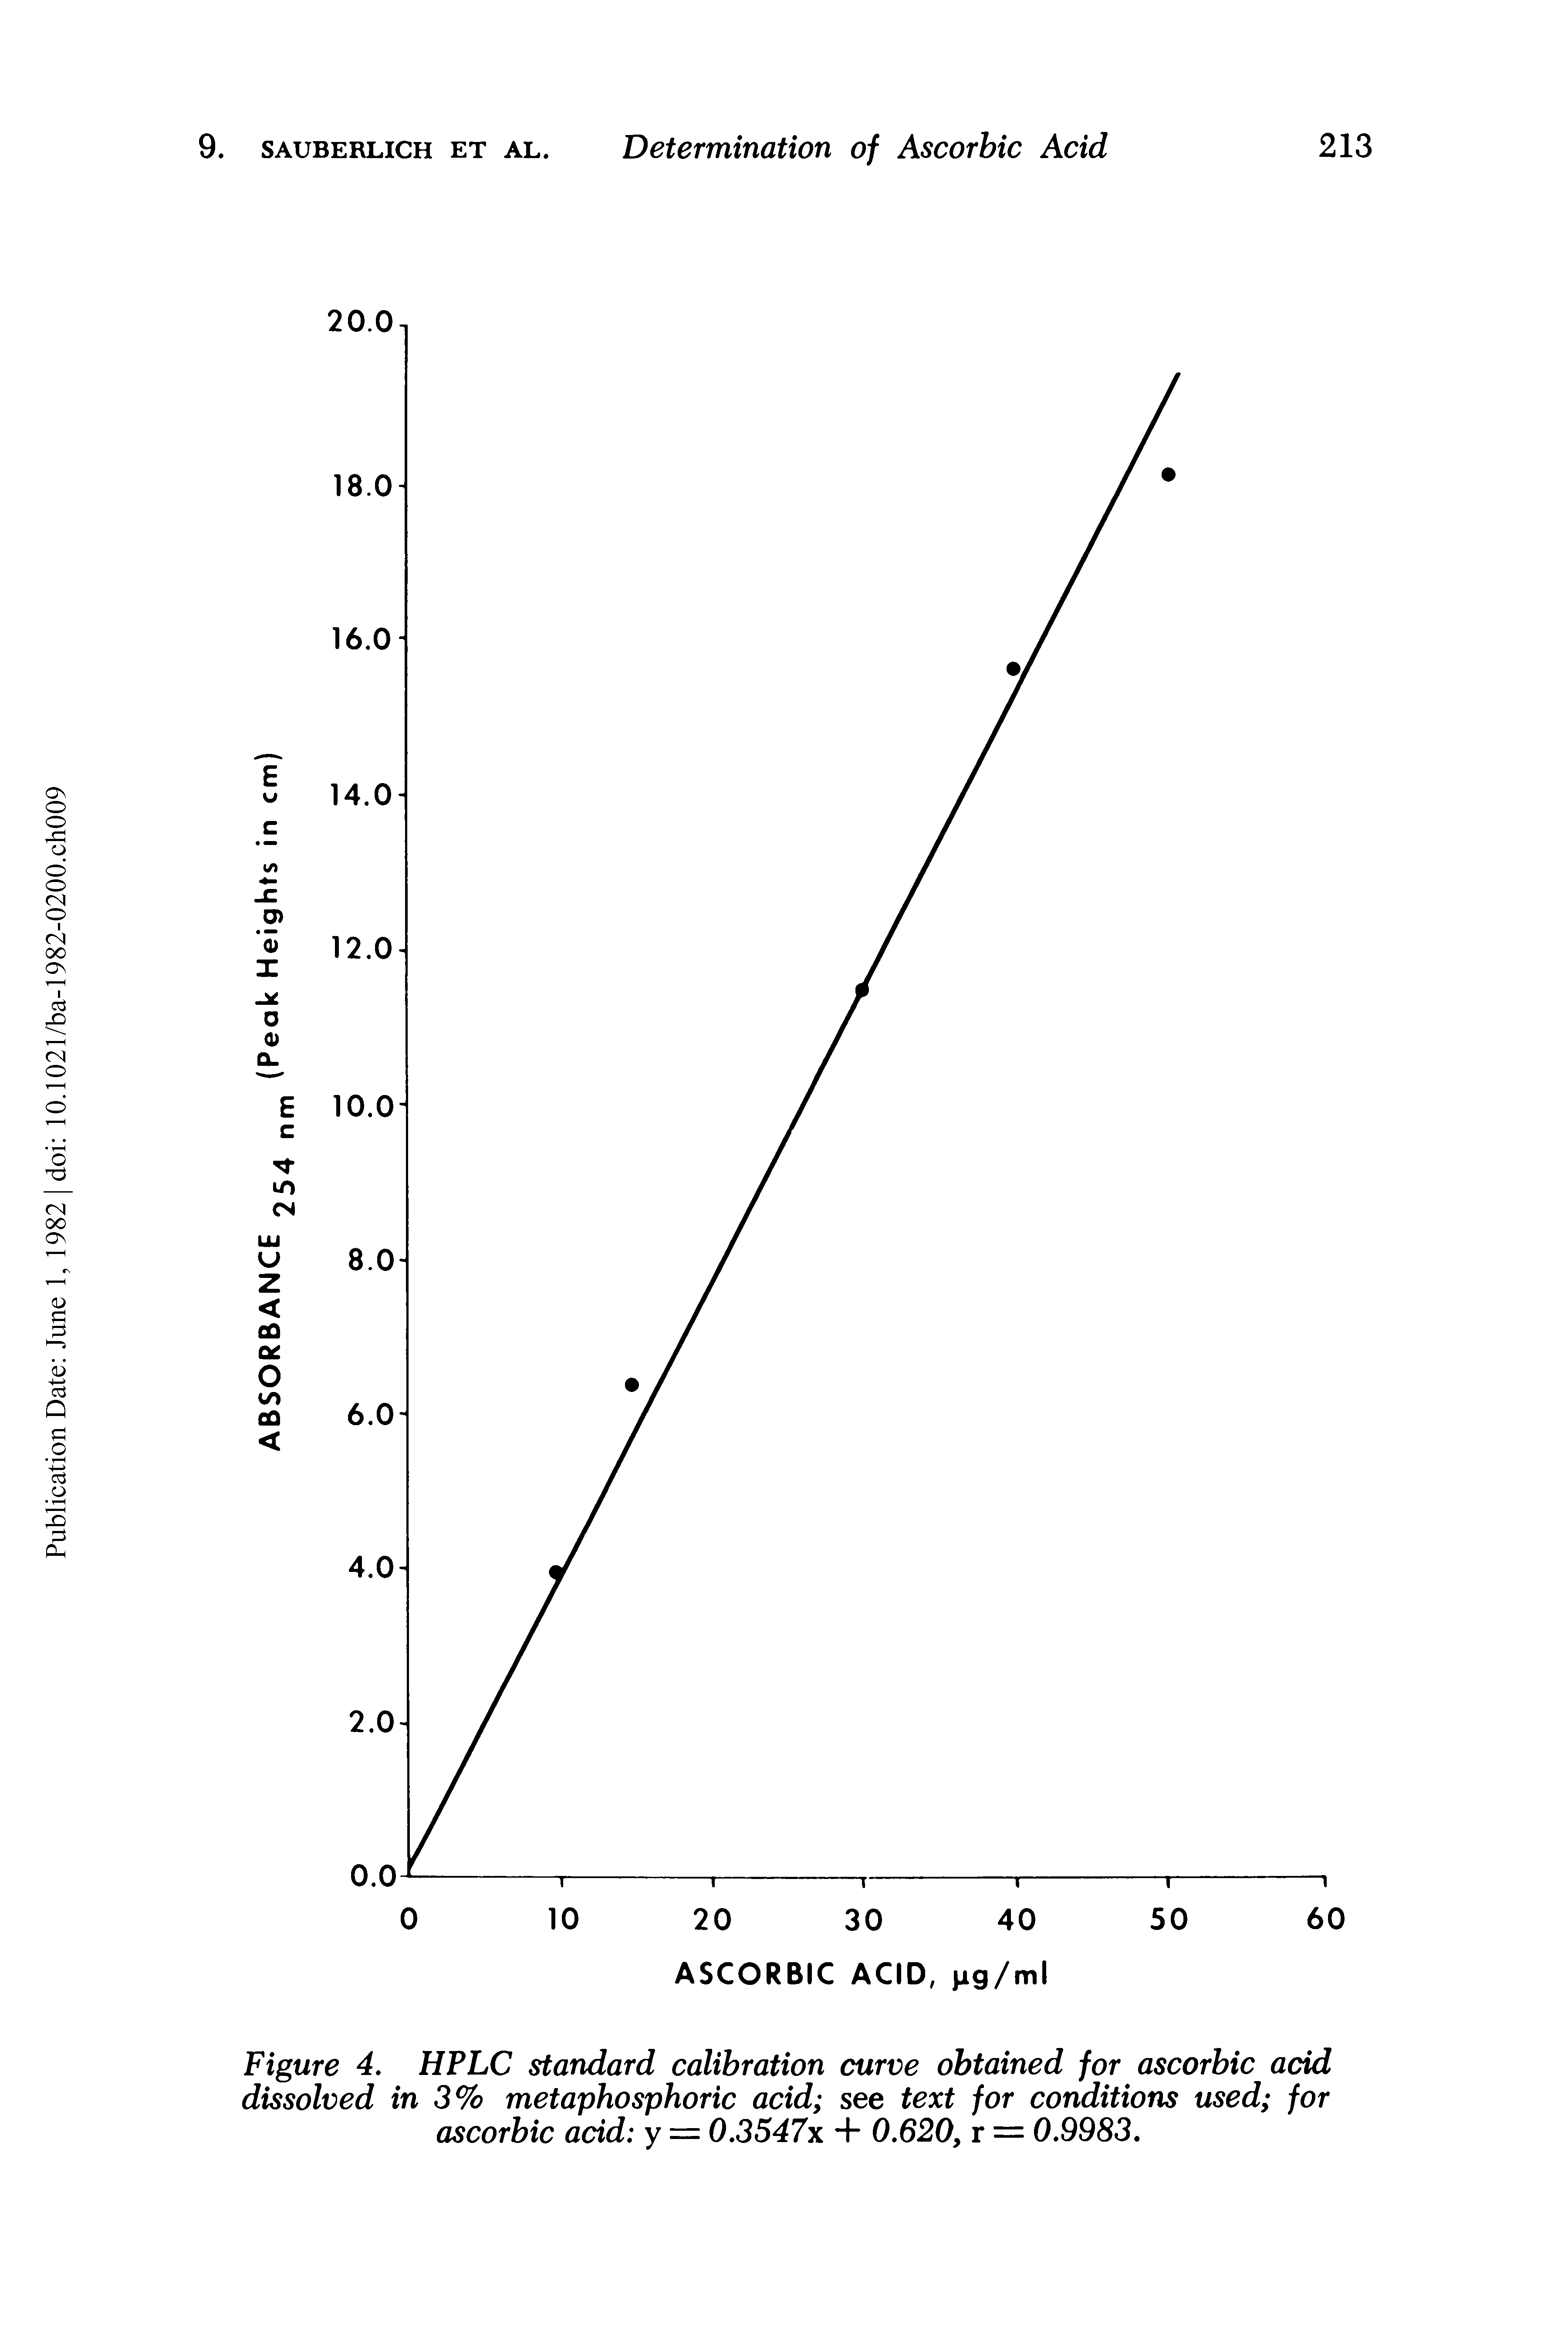 Figure 4. HPLC standard calibration curve obtained for ascorbic add dissolved in 3% metaphosphoric acid see text for conditions used for ascorbic add y = 0.3547x + 0.620, r = 0.9983.